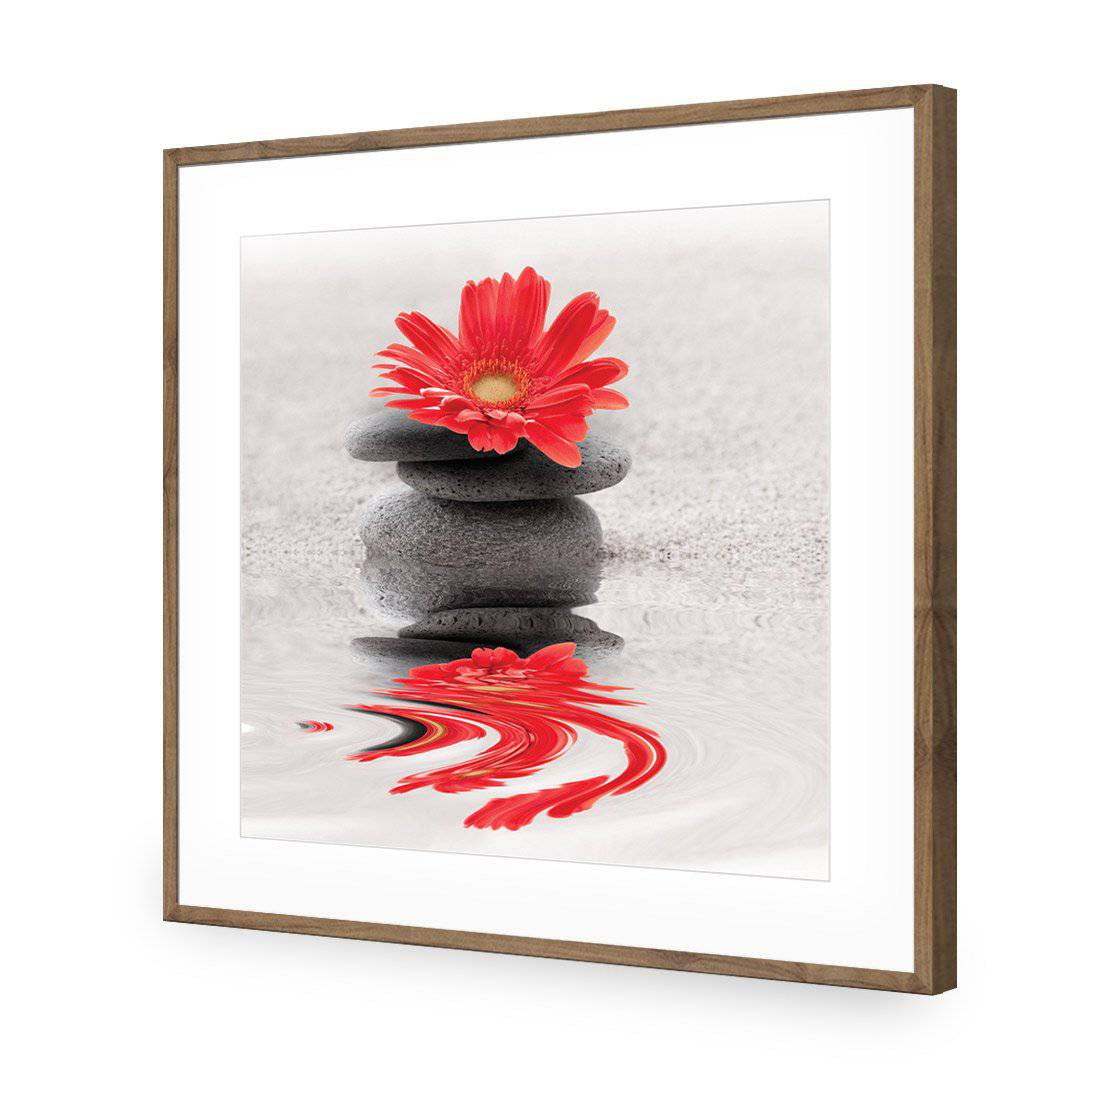 Red Flower Reflection, Square-Acrylic-Wall Art Design-With Border-Acrylic - Natural Frame-37x37cm-Wall Art Designs